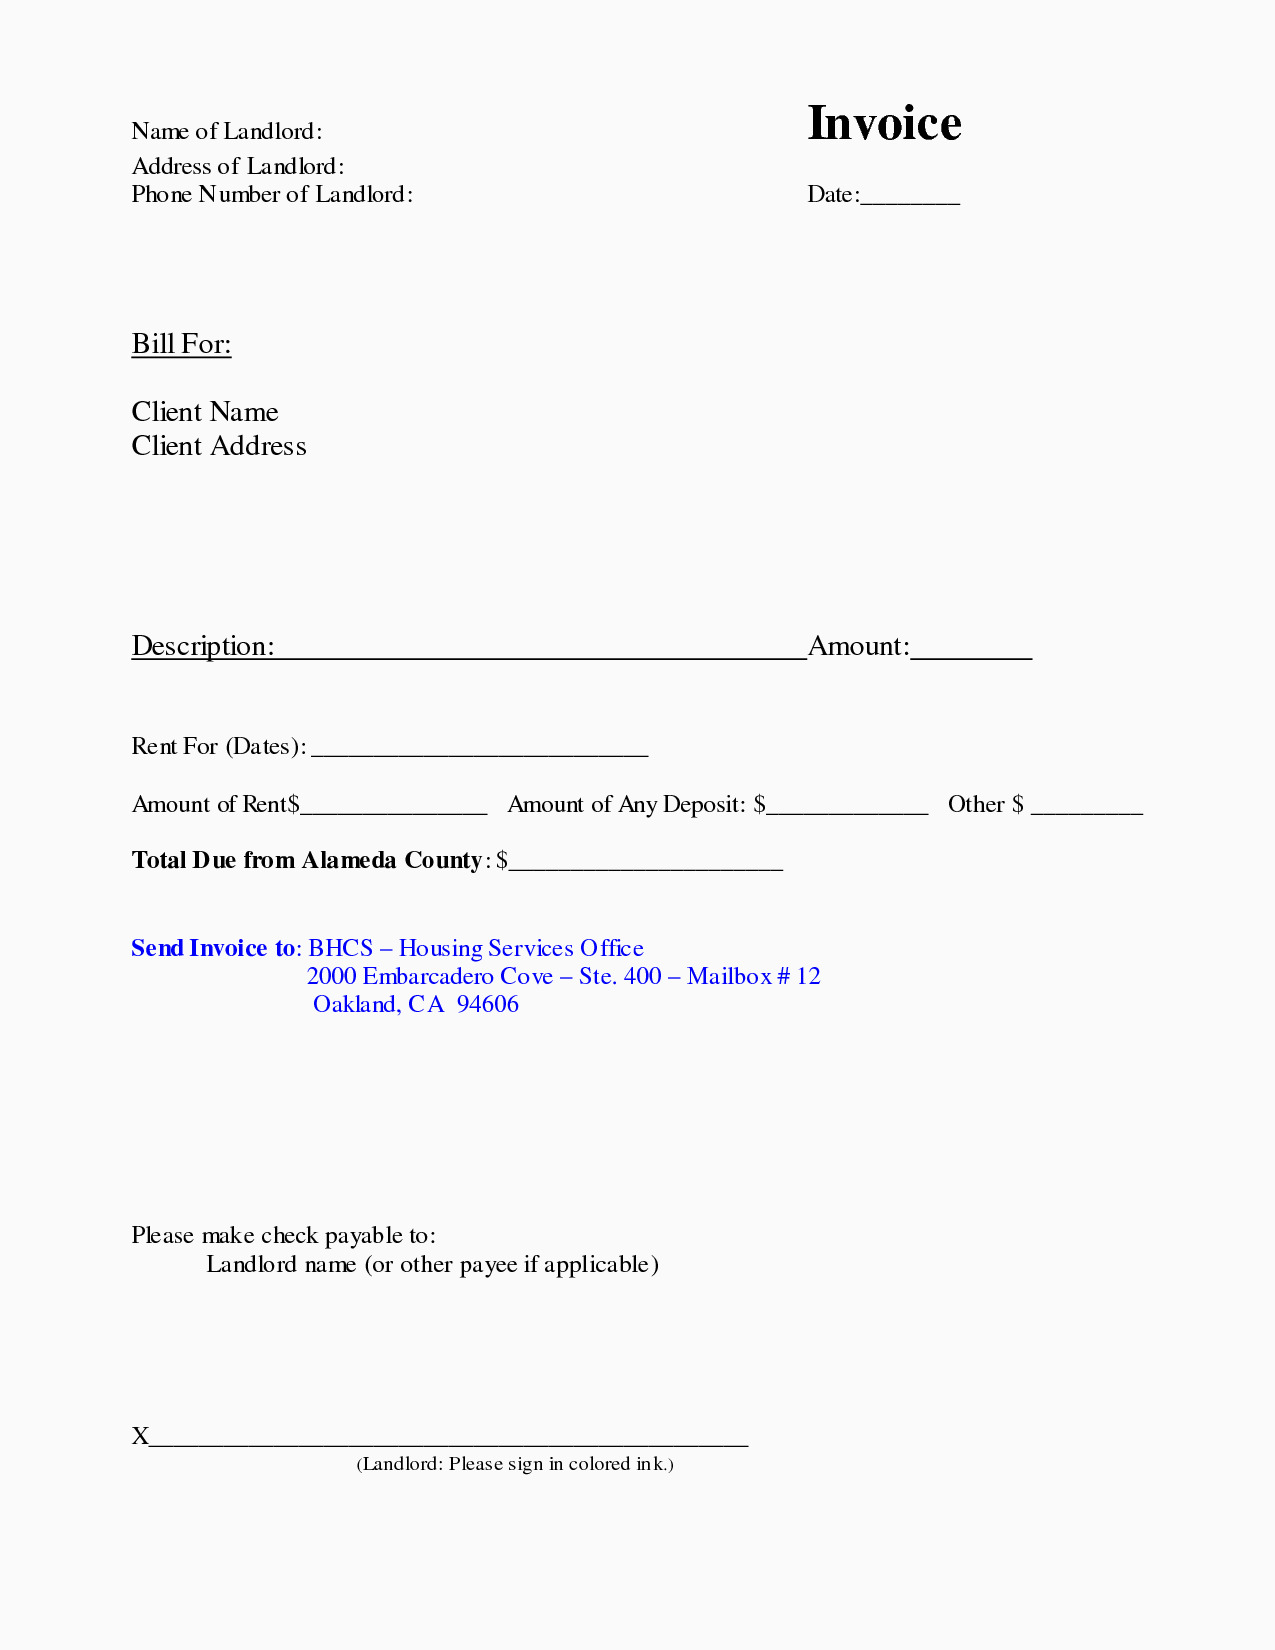 monthly-rent-invoice-template